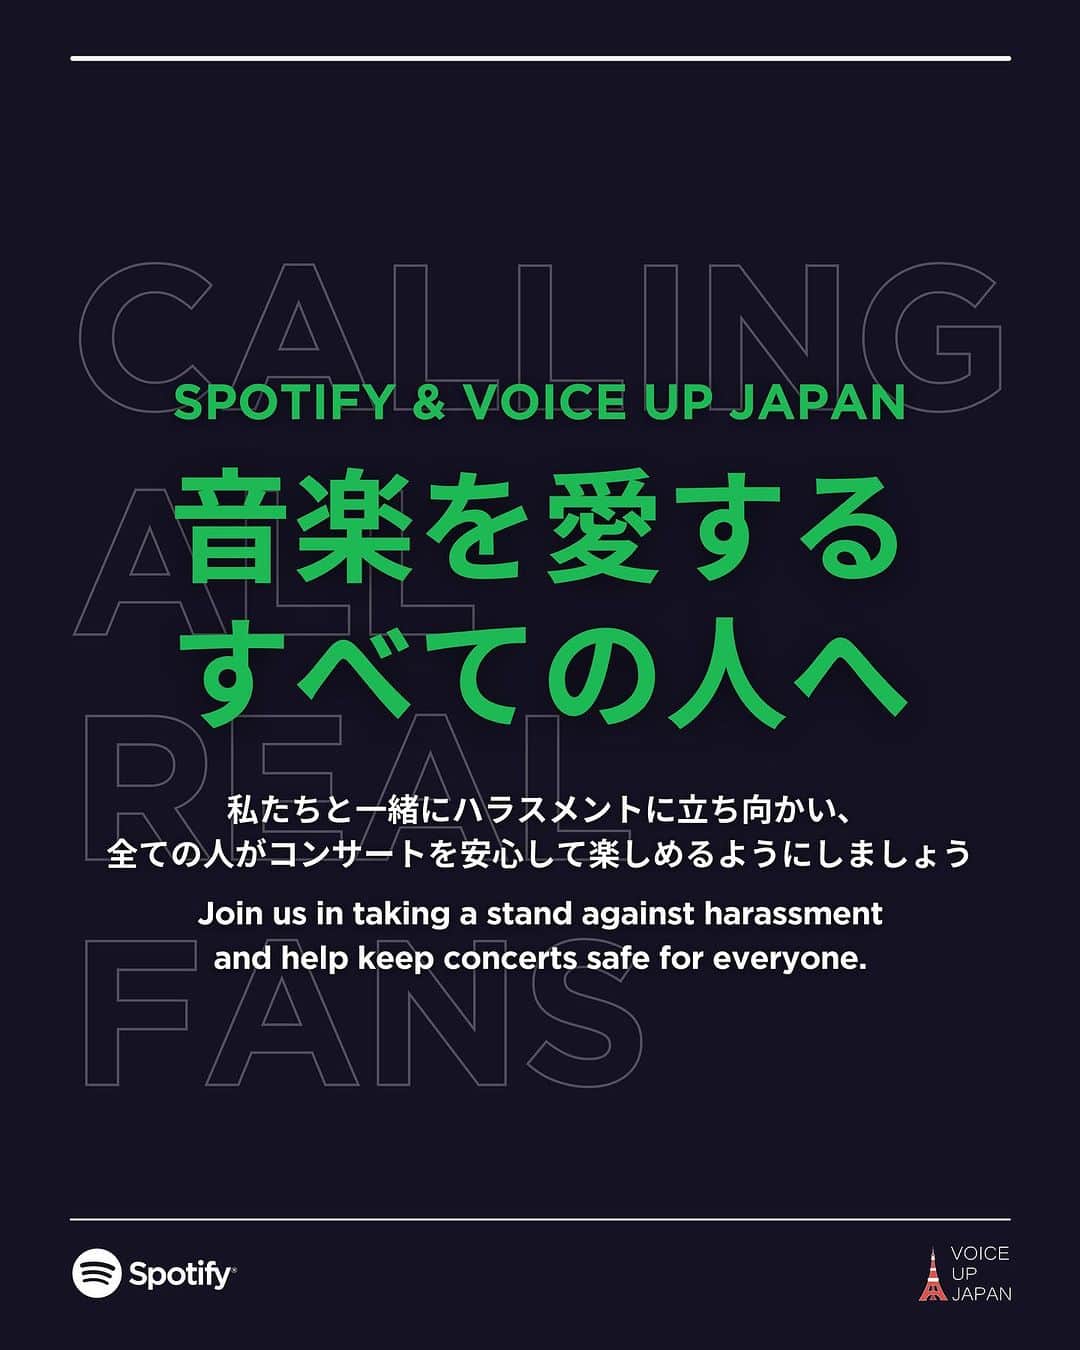 Spotify Japanのインスタグラム：「私たちもこんなことを言わなければならないなんて信じられません。誰もがハラスメントのないライブを楽しむ権利があります。「真の音楽ファン」であることを証明し、ライブが安全に行われるようなアクションを起こしましょう。  We can’t believe we have to say this either. Everyone deserves to enjoy live shows free from harassment. Prove you’re a real fan and join us in the movement to keep concerts safe, so we can get back to doing what we love: posting podcast clips of juicy celebrity admissions for all of us to lose our minds over.  #Spotify x #VoiceUpJapan」